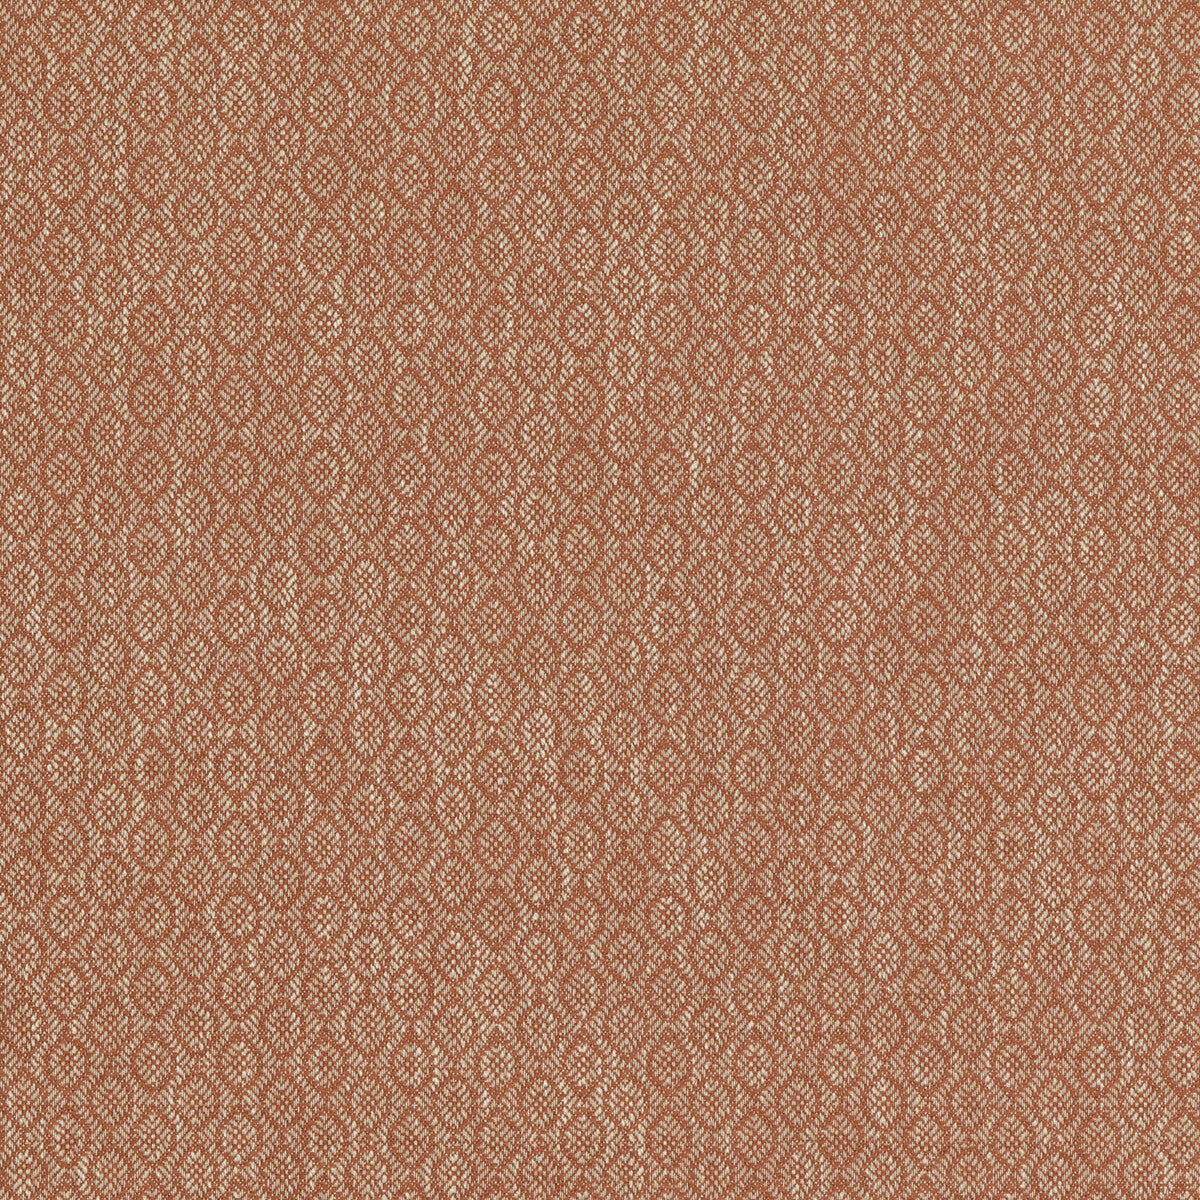 Orchard fabric in spice color - pattern PF50488.330.0 - by Baker Lifestyle in the Block Weaves collection